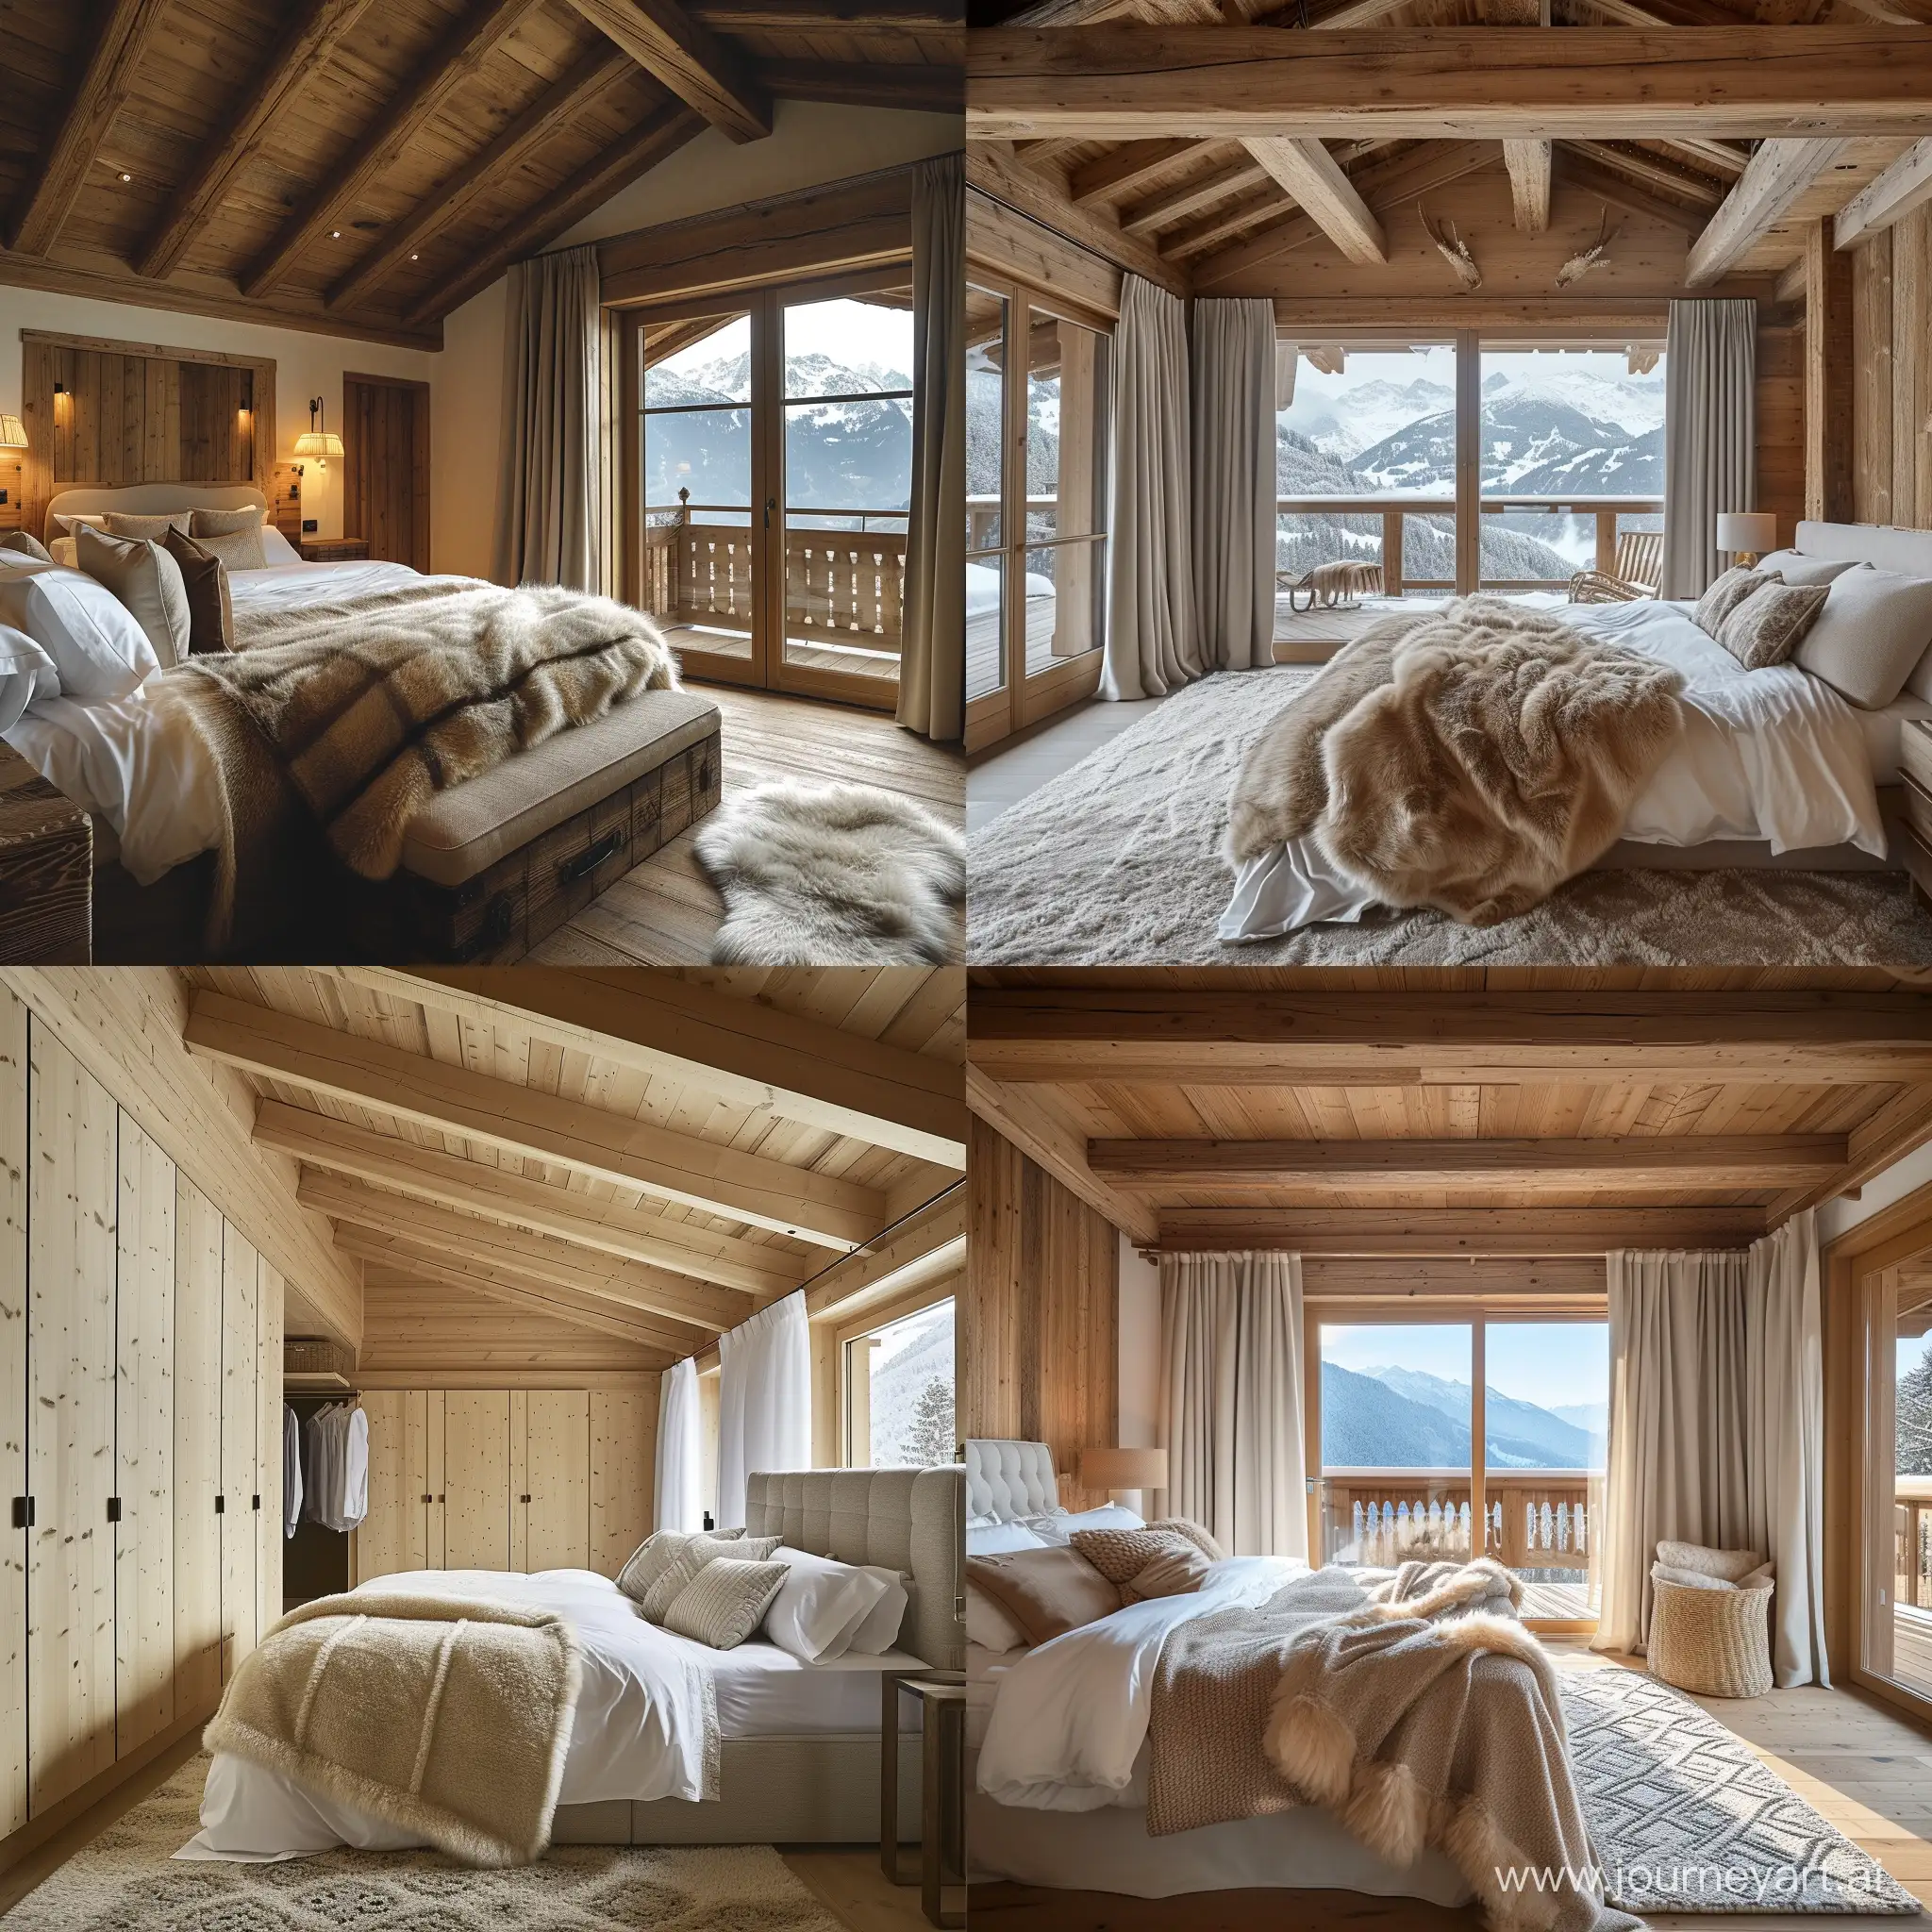 Cozy-Bedroom-in-Mountain-Chalet-Style-House